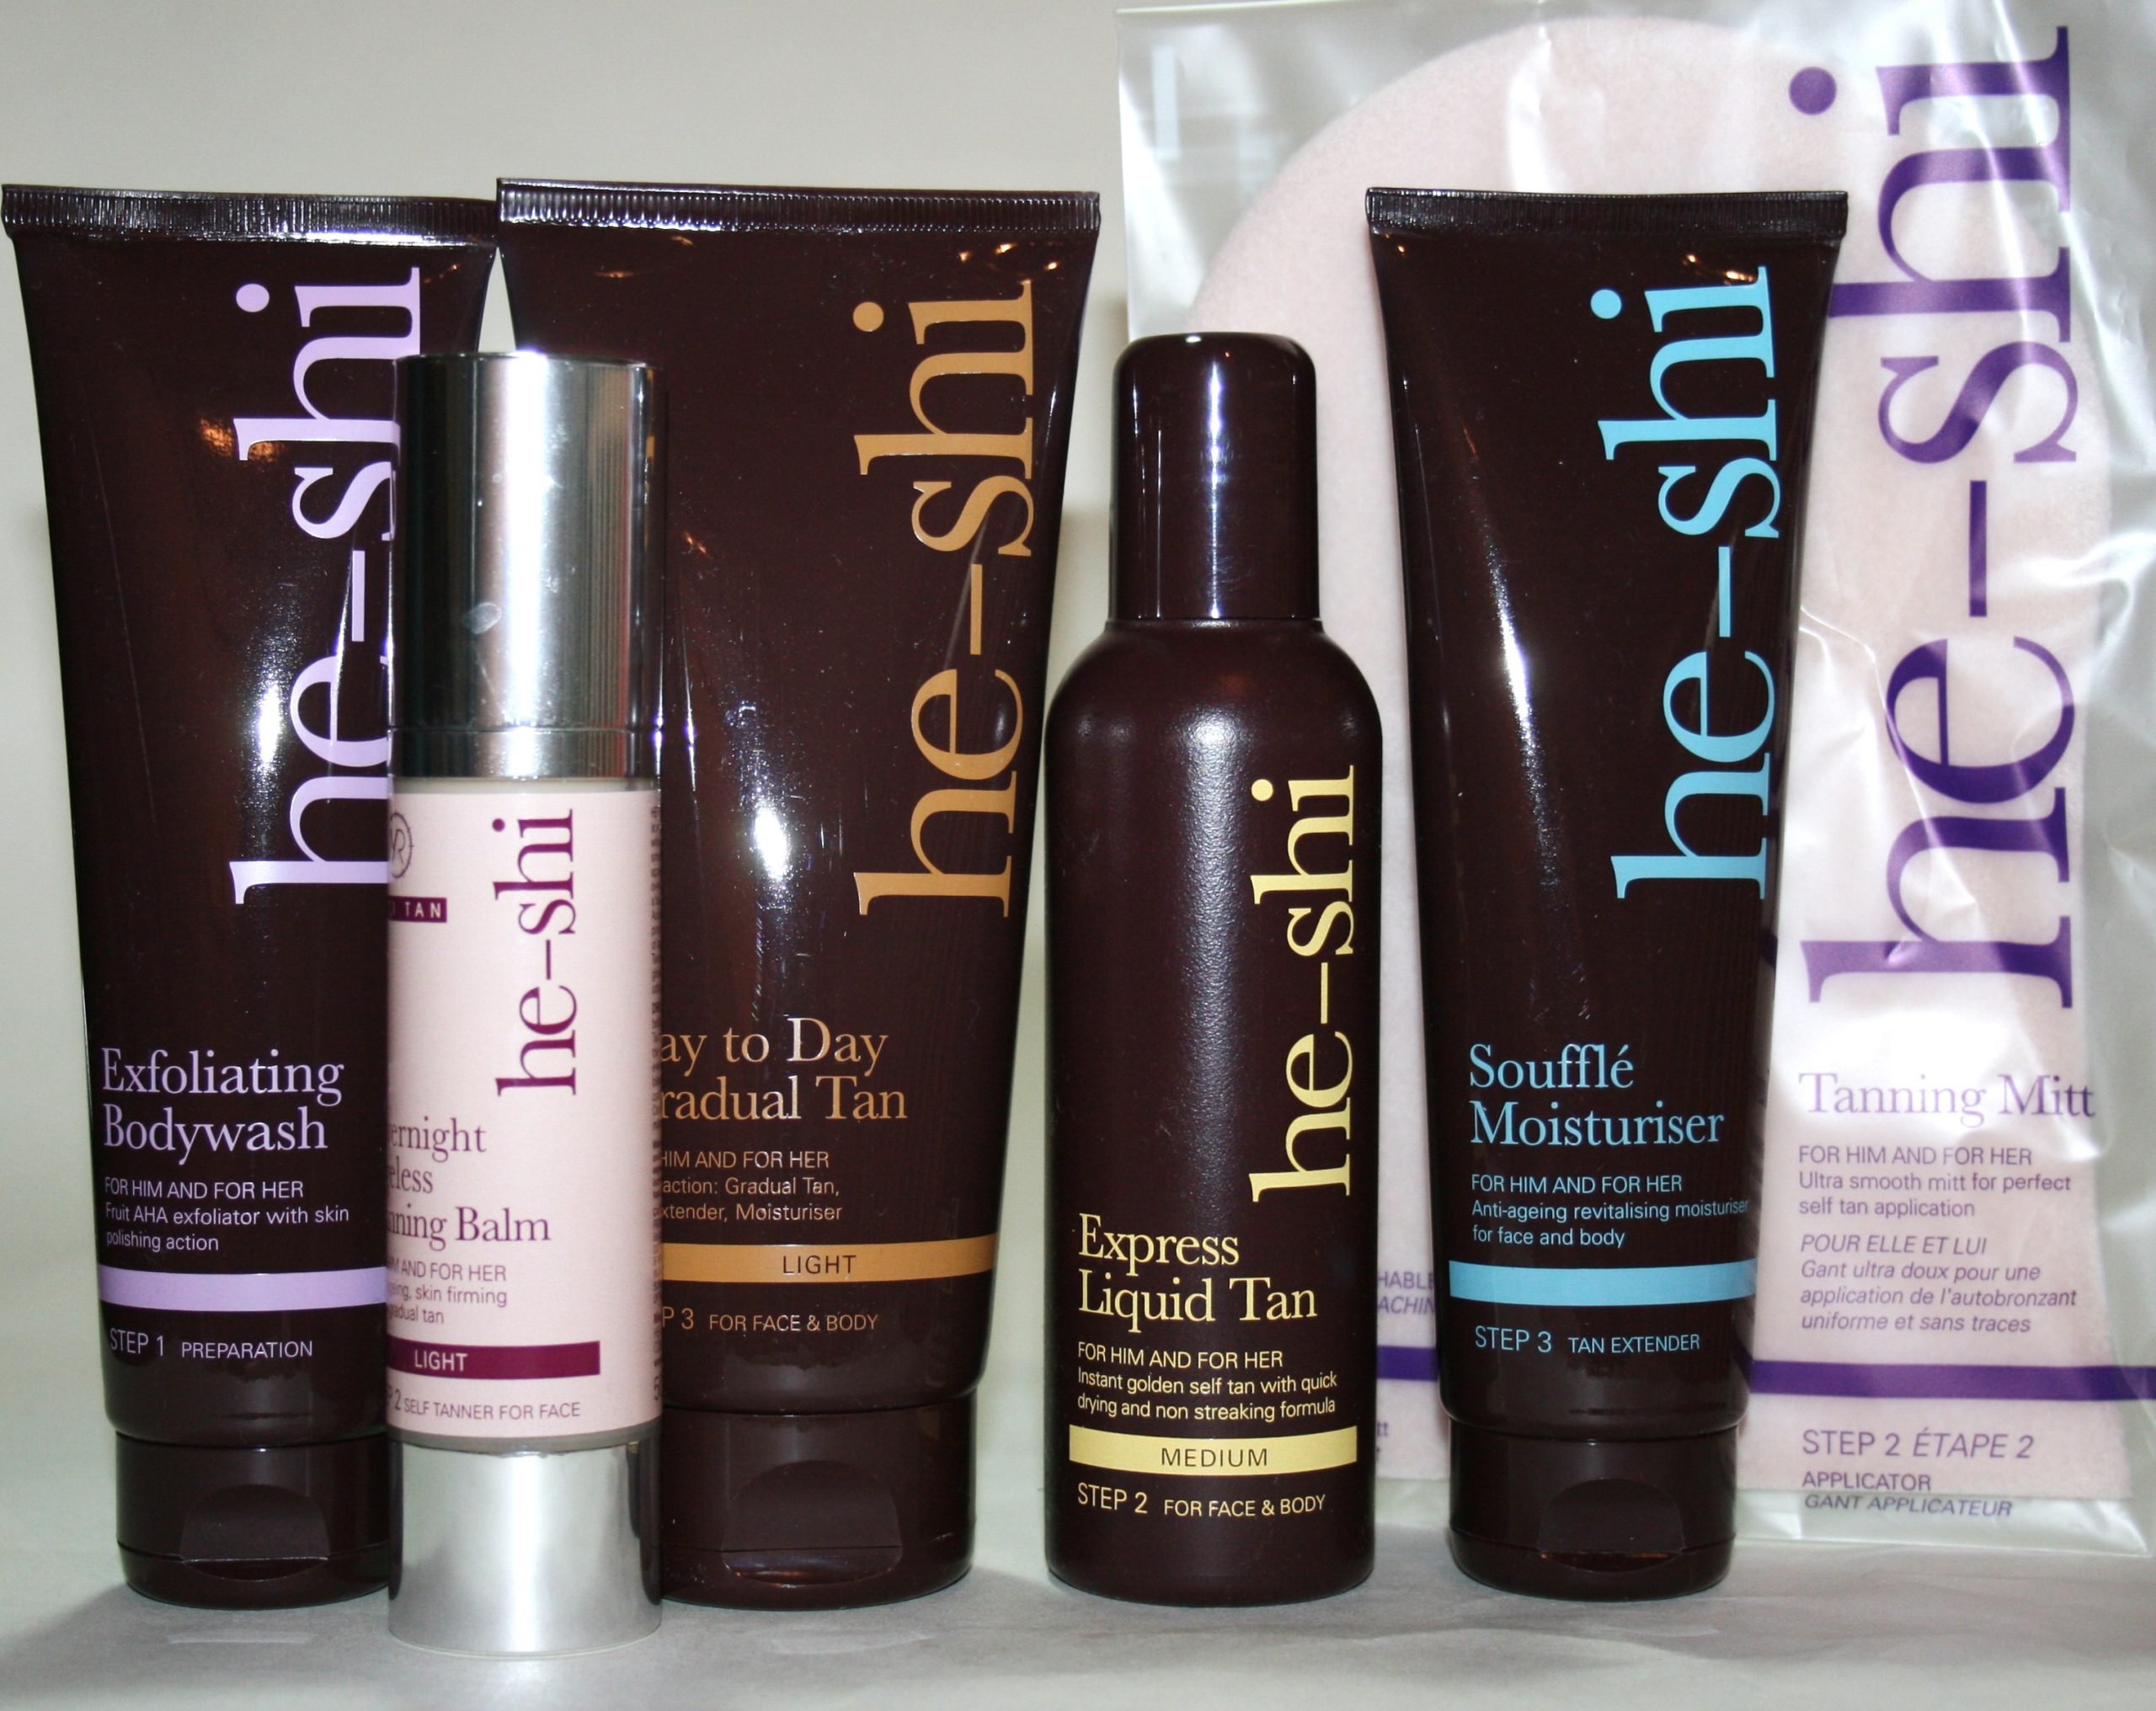 The Tanning Diaries: He-Shi Tanning Products